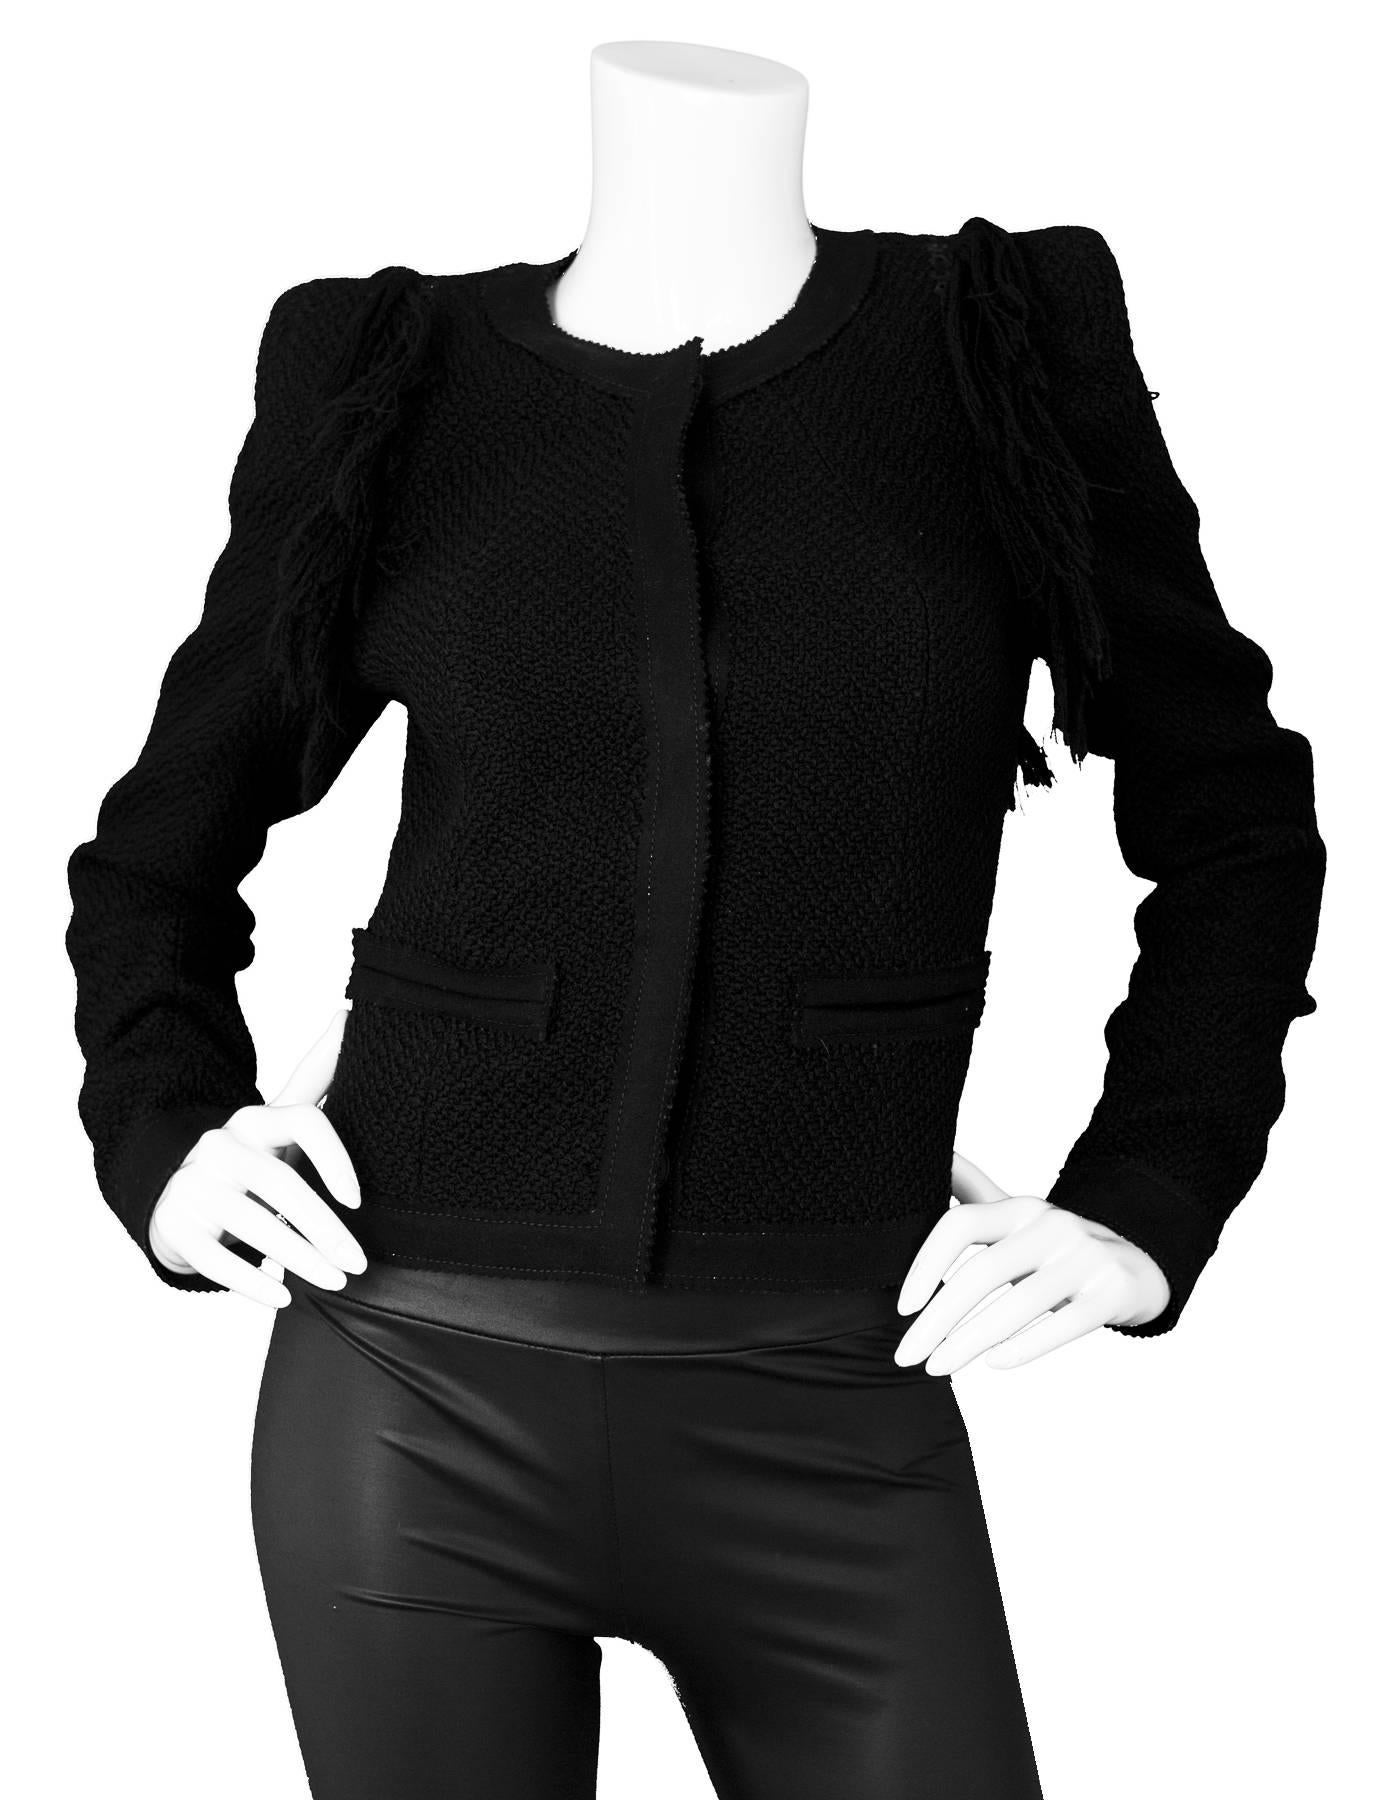 Roberto Cavalli Black Wool Tweed Jacket Sz IT40

Features fringe detail at shoulders

Made In: Portugal
Color: Black
Composition: 100% Wool 
Lining: Black textile
Closure/Opening: Front snap button closure
Exterior Pockets: Faux front